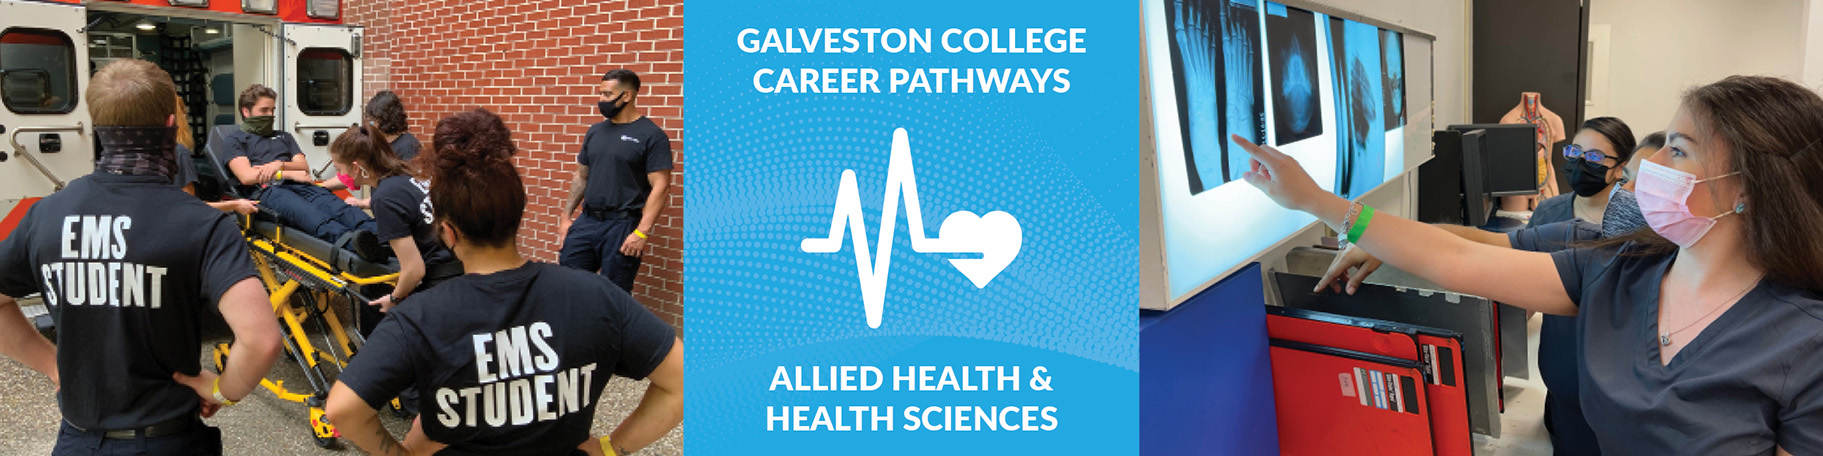 Allied Health and Health Services Pathway